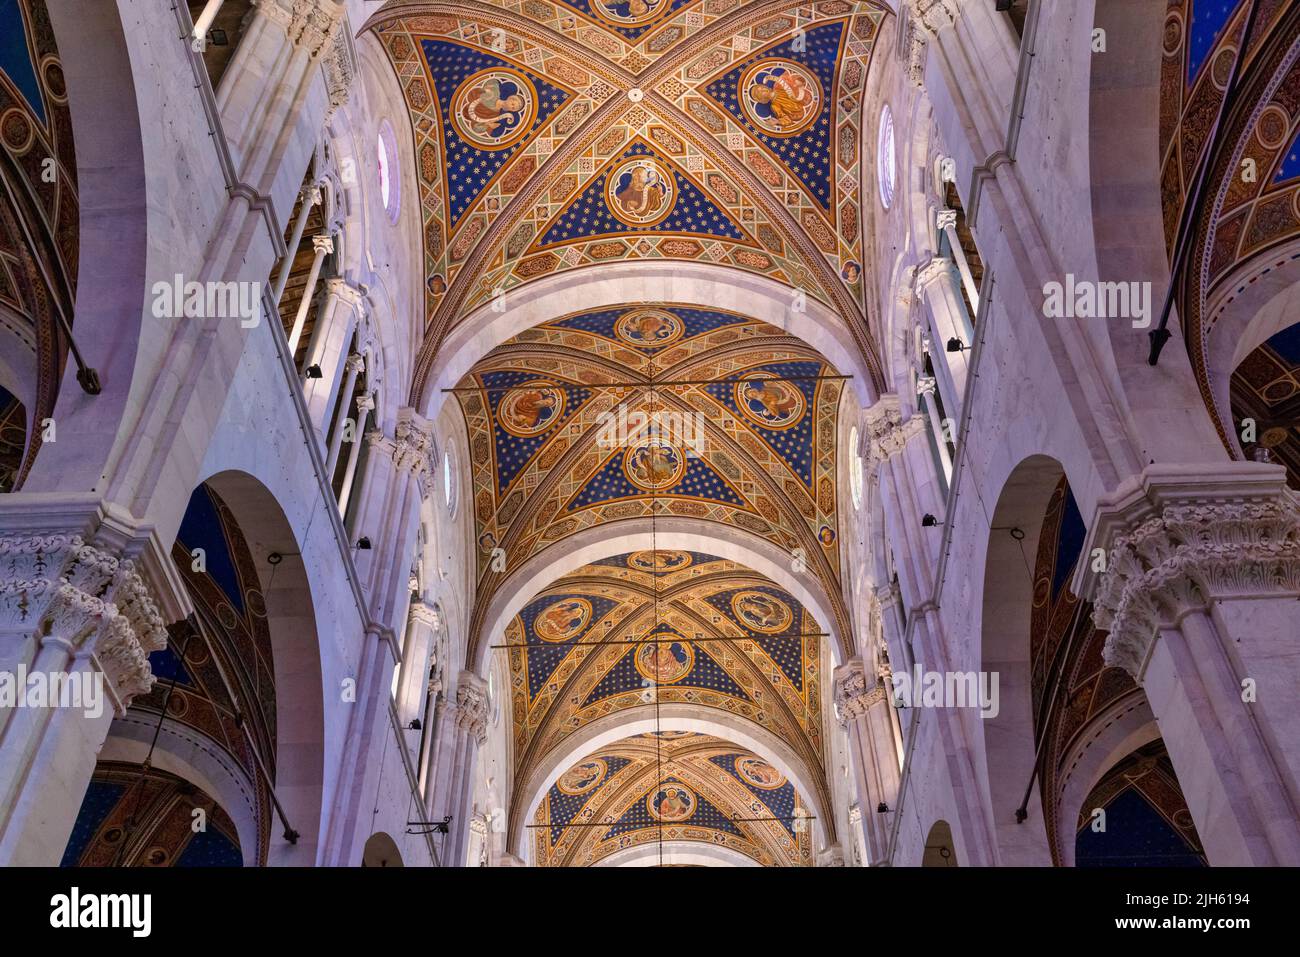 Duomo San Martino.  St. Martin's cathedral.  Ceiling of the nave.  Lucca, Lucca Province, Tuscany, Italy.  The city's cathedral dates from the 9th cen Stock Photo